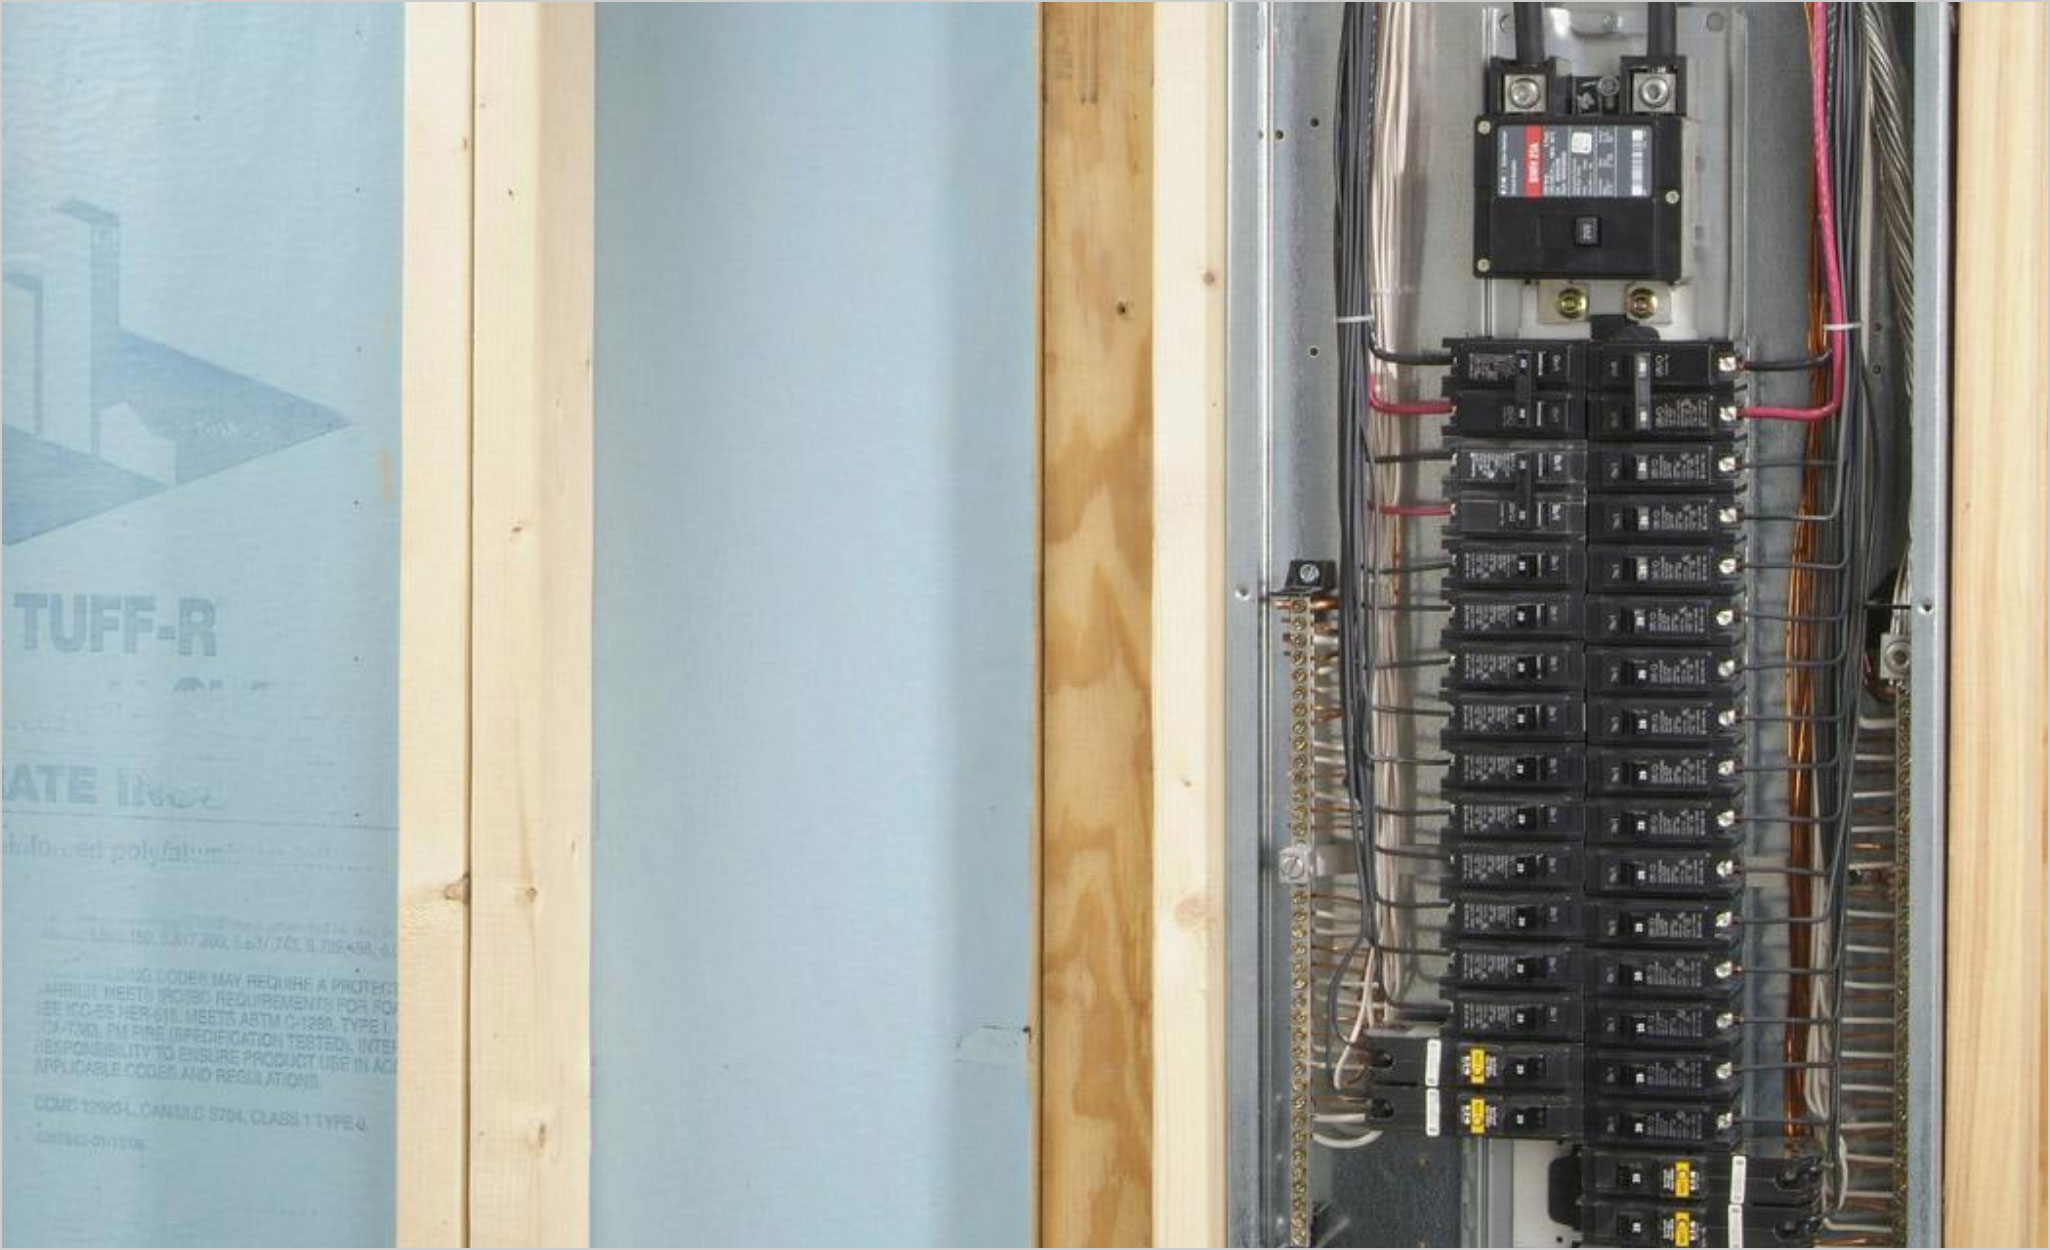 Basic Requirements for Wiring a Residential House